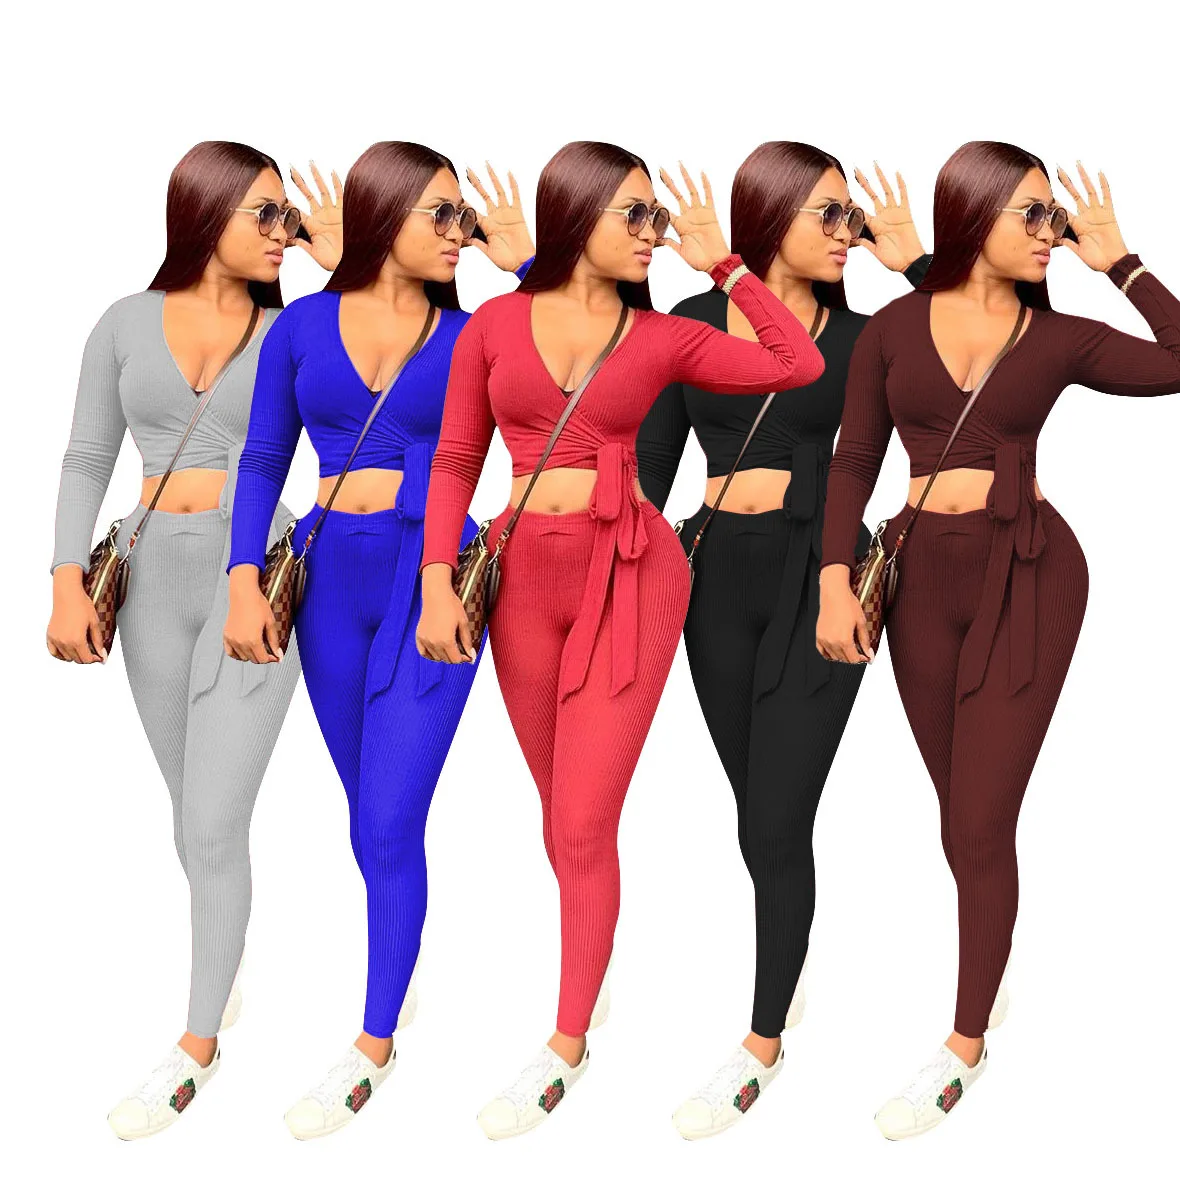 

11TS1080 Autumn Winter Women Casual Fashion Solid Navel Skinny Bandage Two Piece Set Top and Pants Tracksuit Sweatsuit Outfits